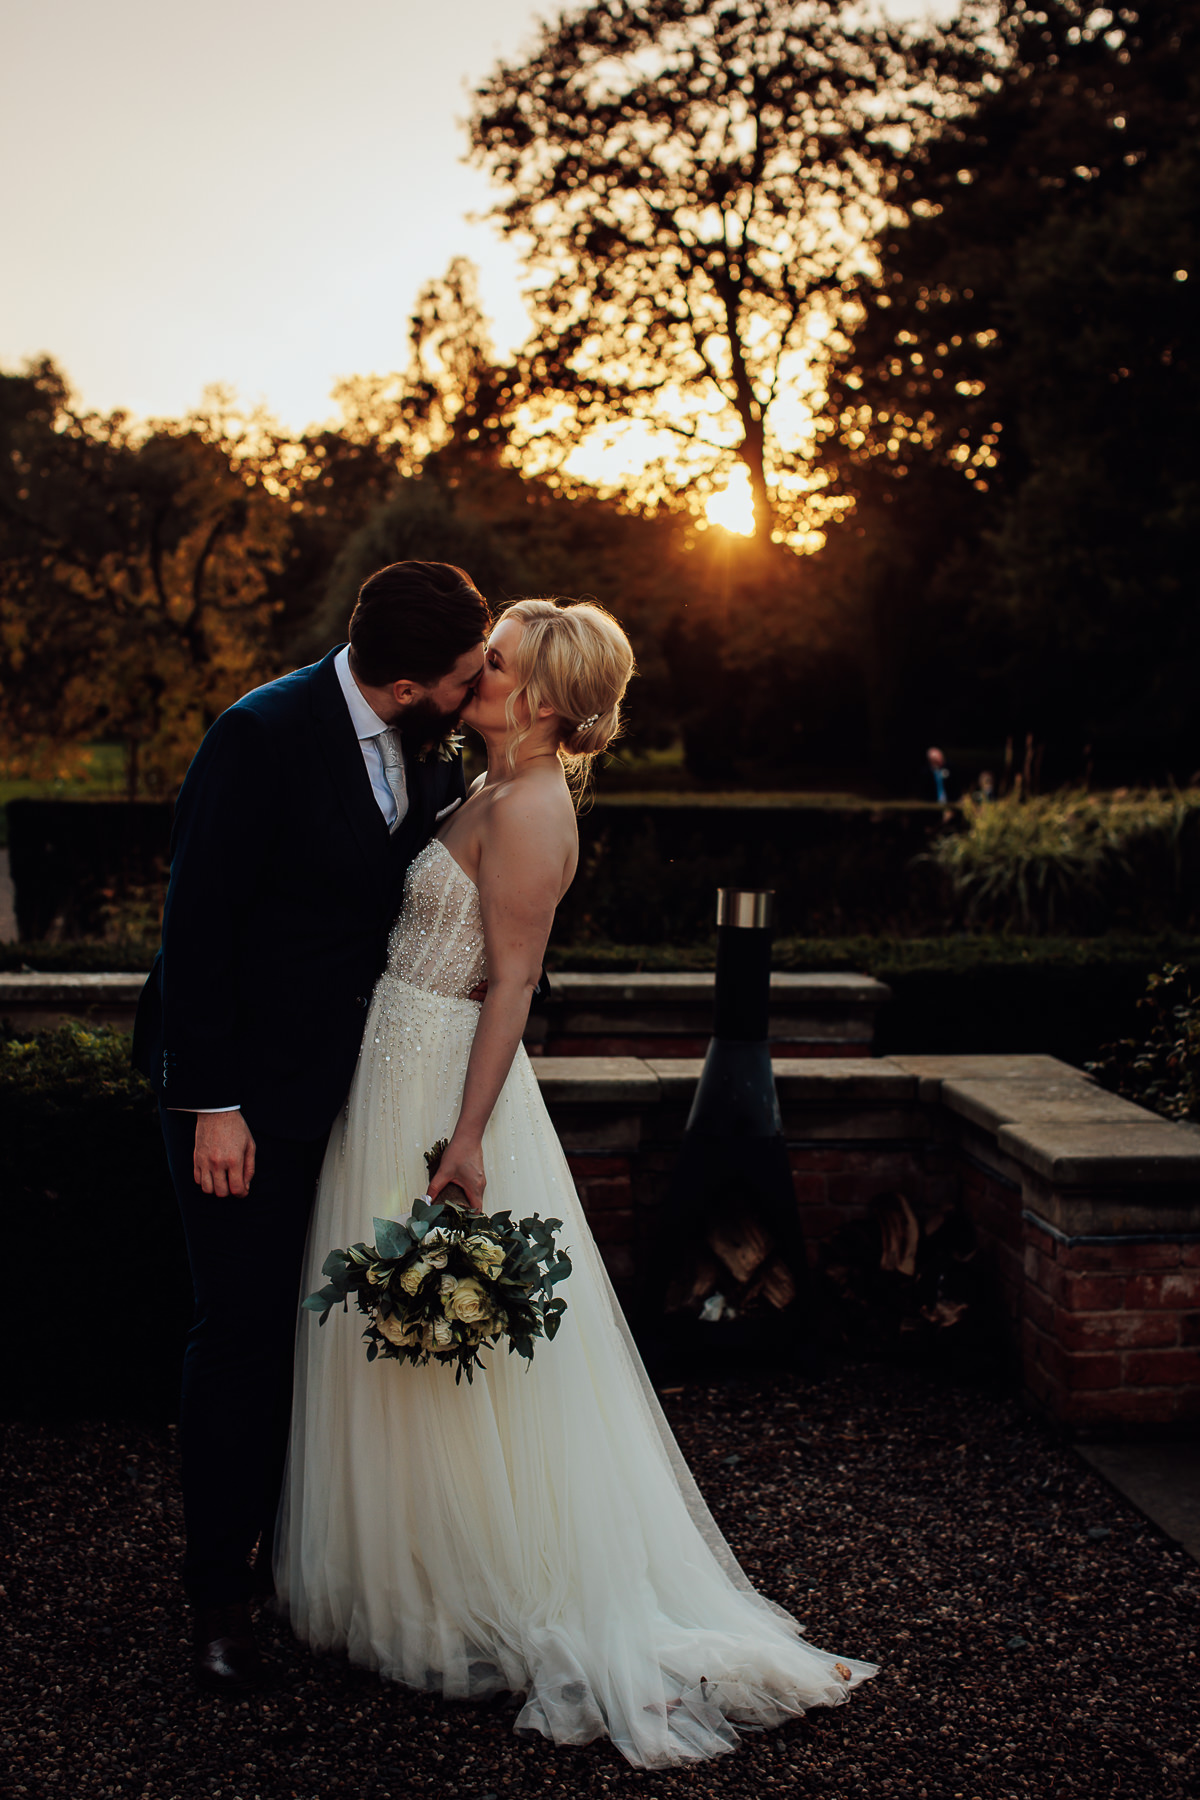 Portrait of bride and groom in sunset